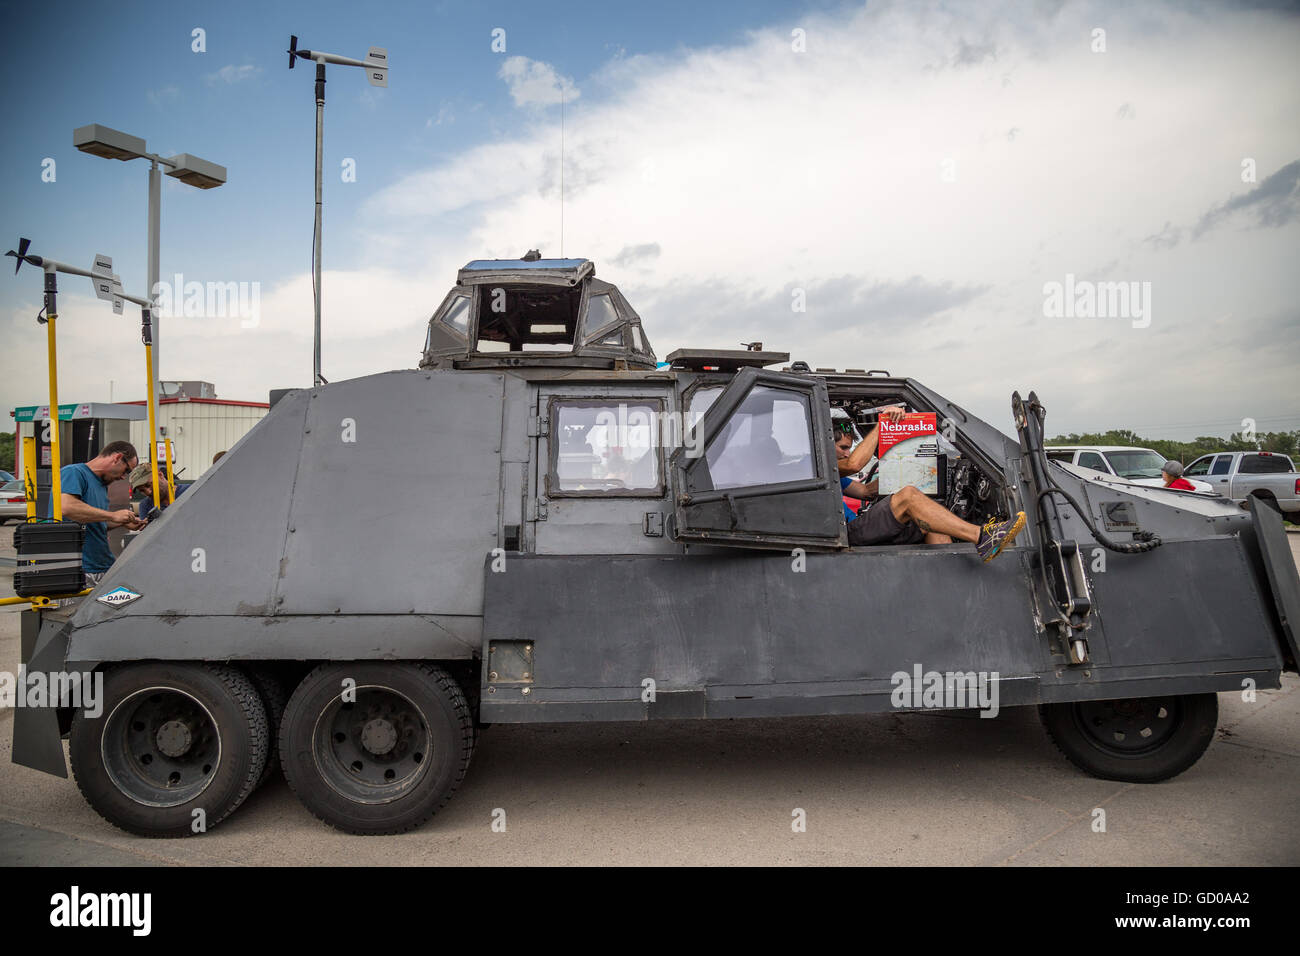 A storm chaser waits for a storm in the TIV 2, or 'Tornado Intercept Vehicle 2', an armored vehicle designed to enter tornadoes. Stock Photo